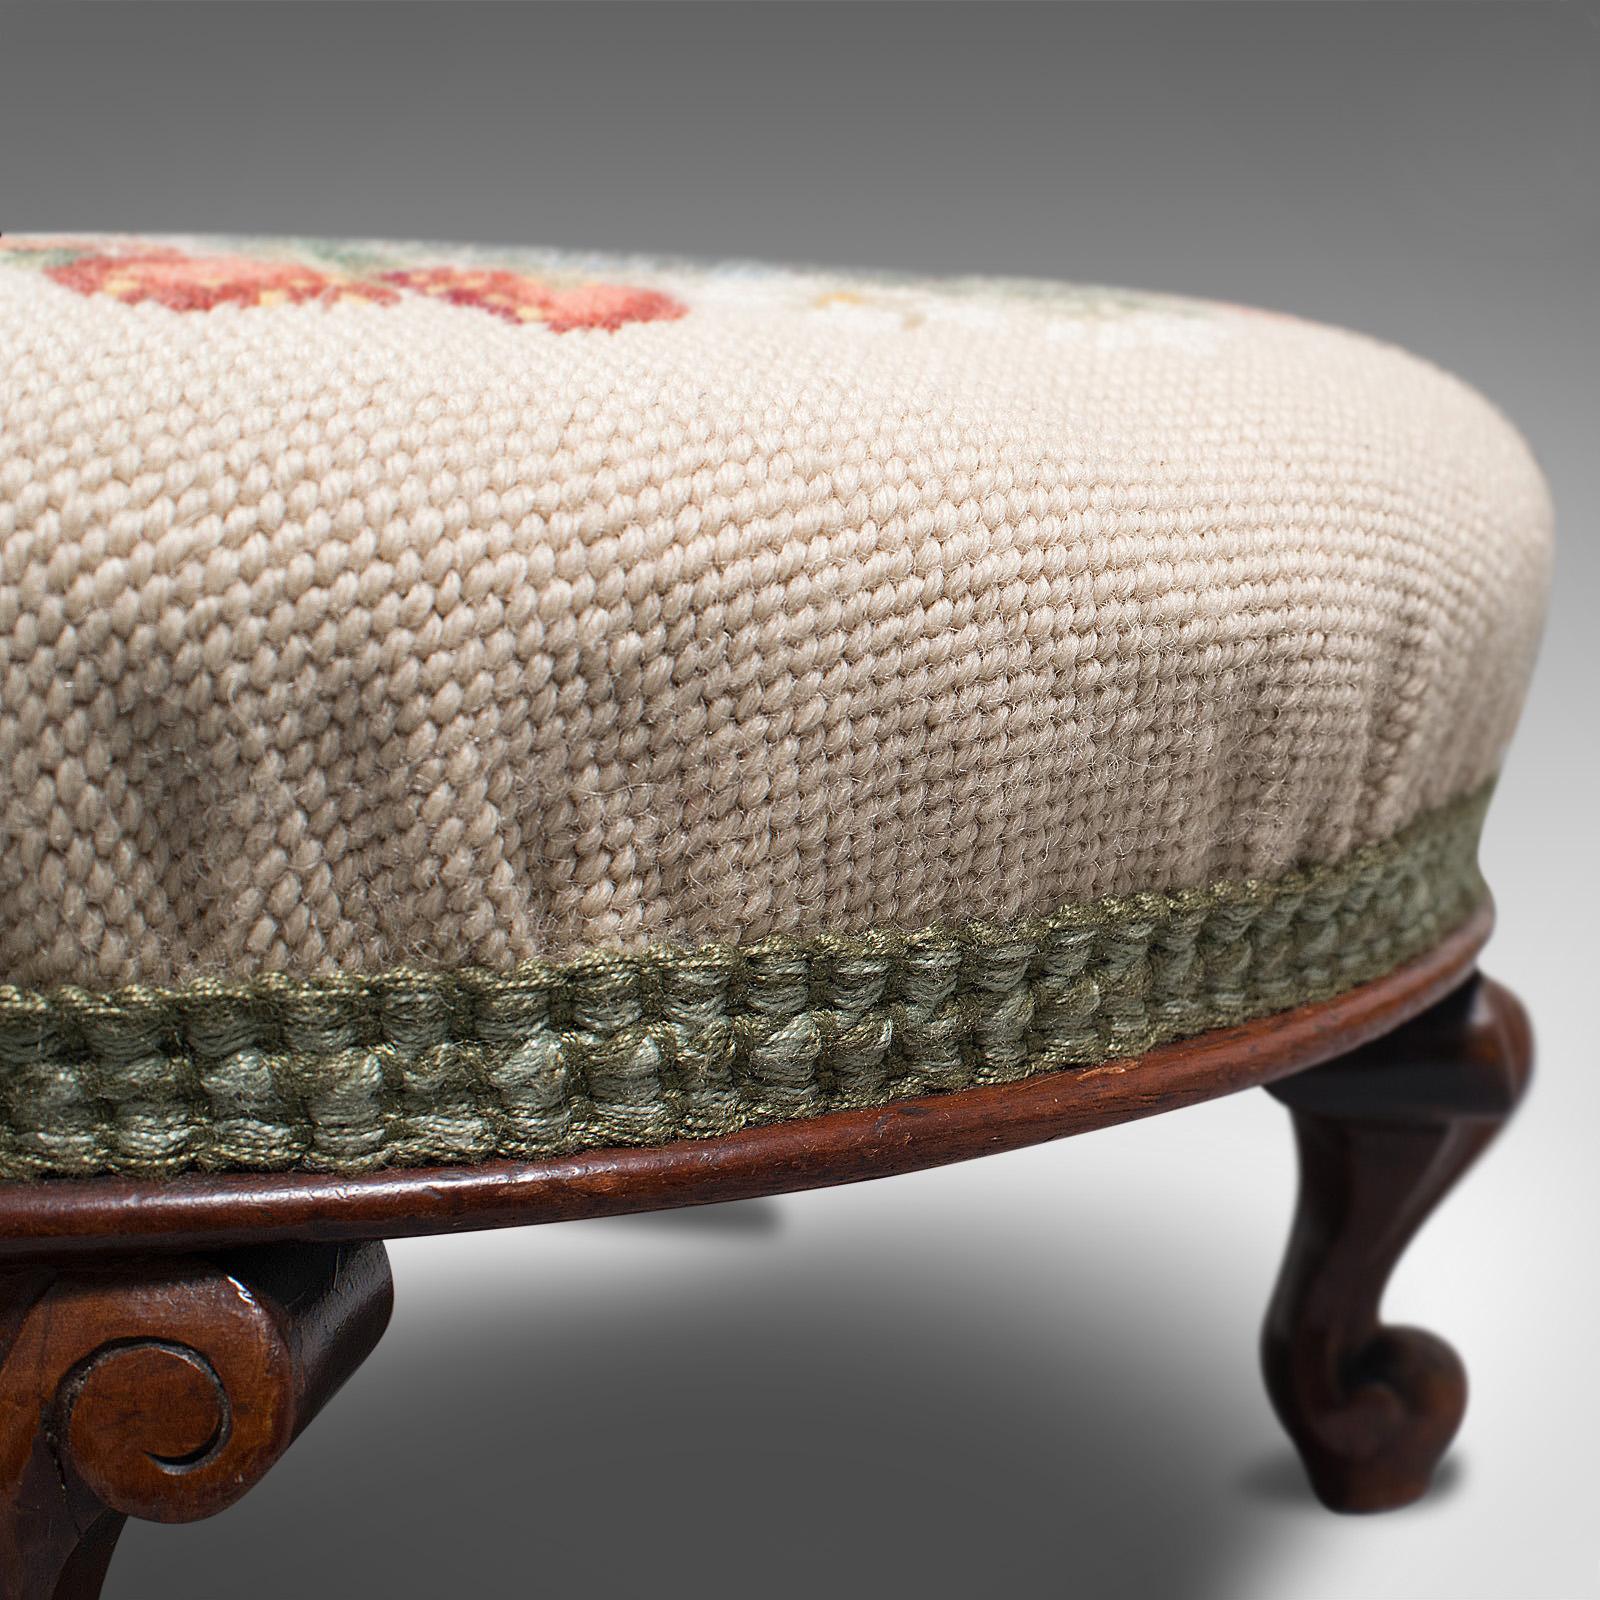 Small Antique Footstool, English, Walnut, Needlepoint Tapestry, Early Victorian 1